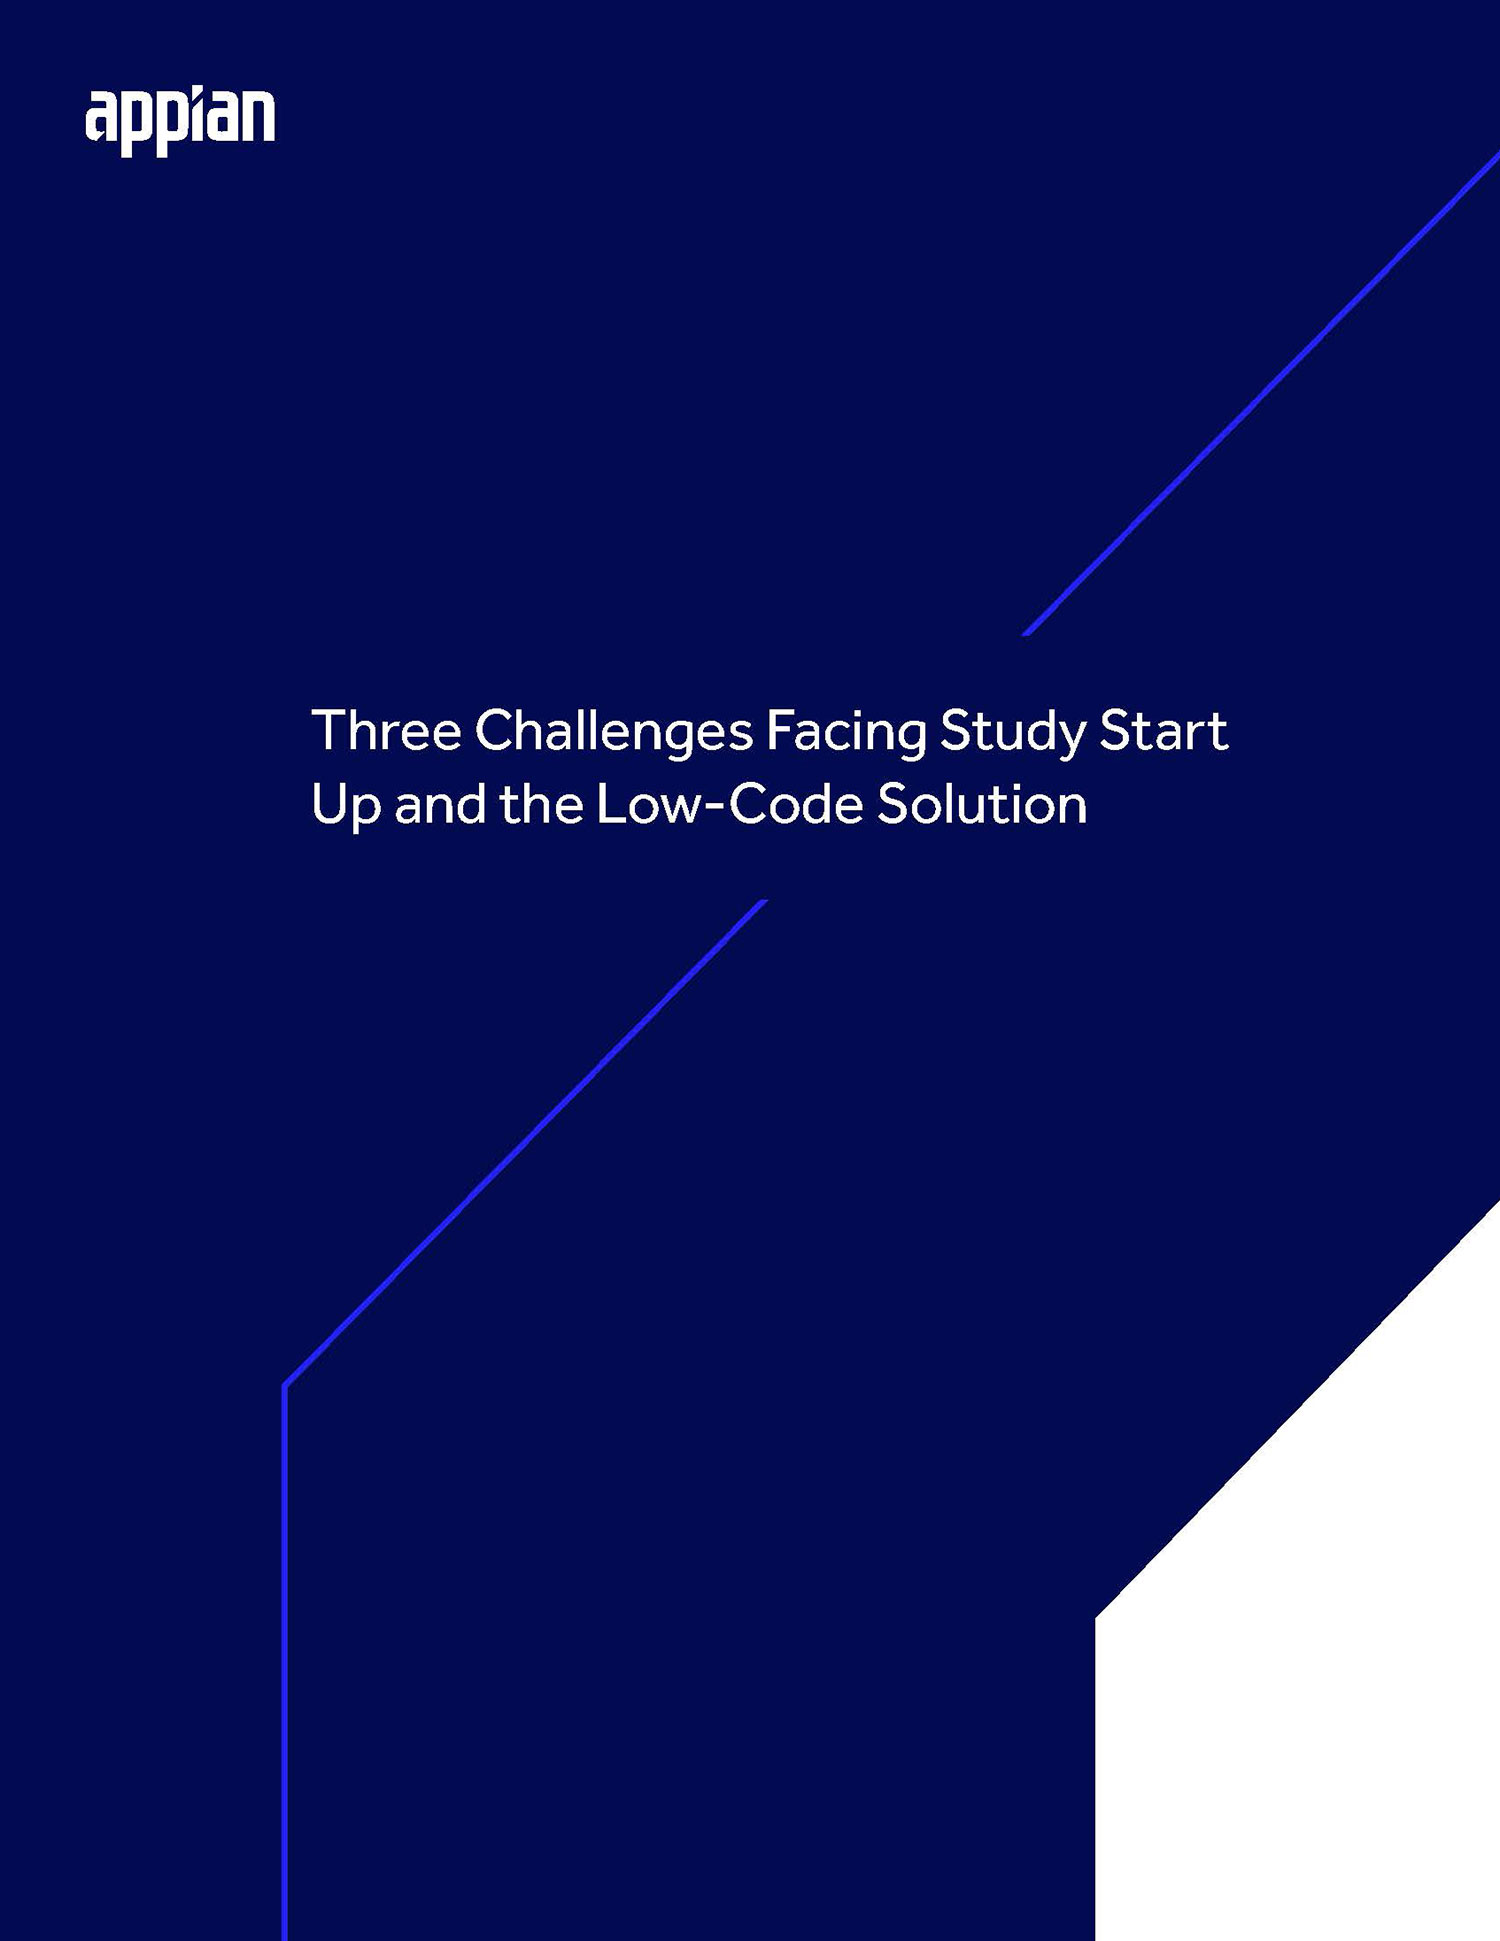 Three Challenges Facing Study Start Up and the Low-Code Automation Solution